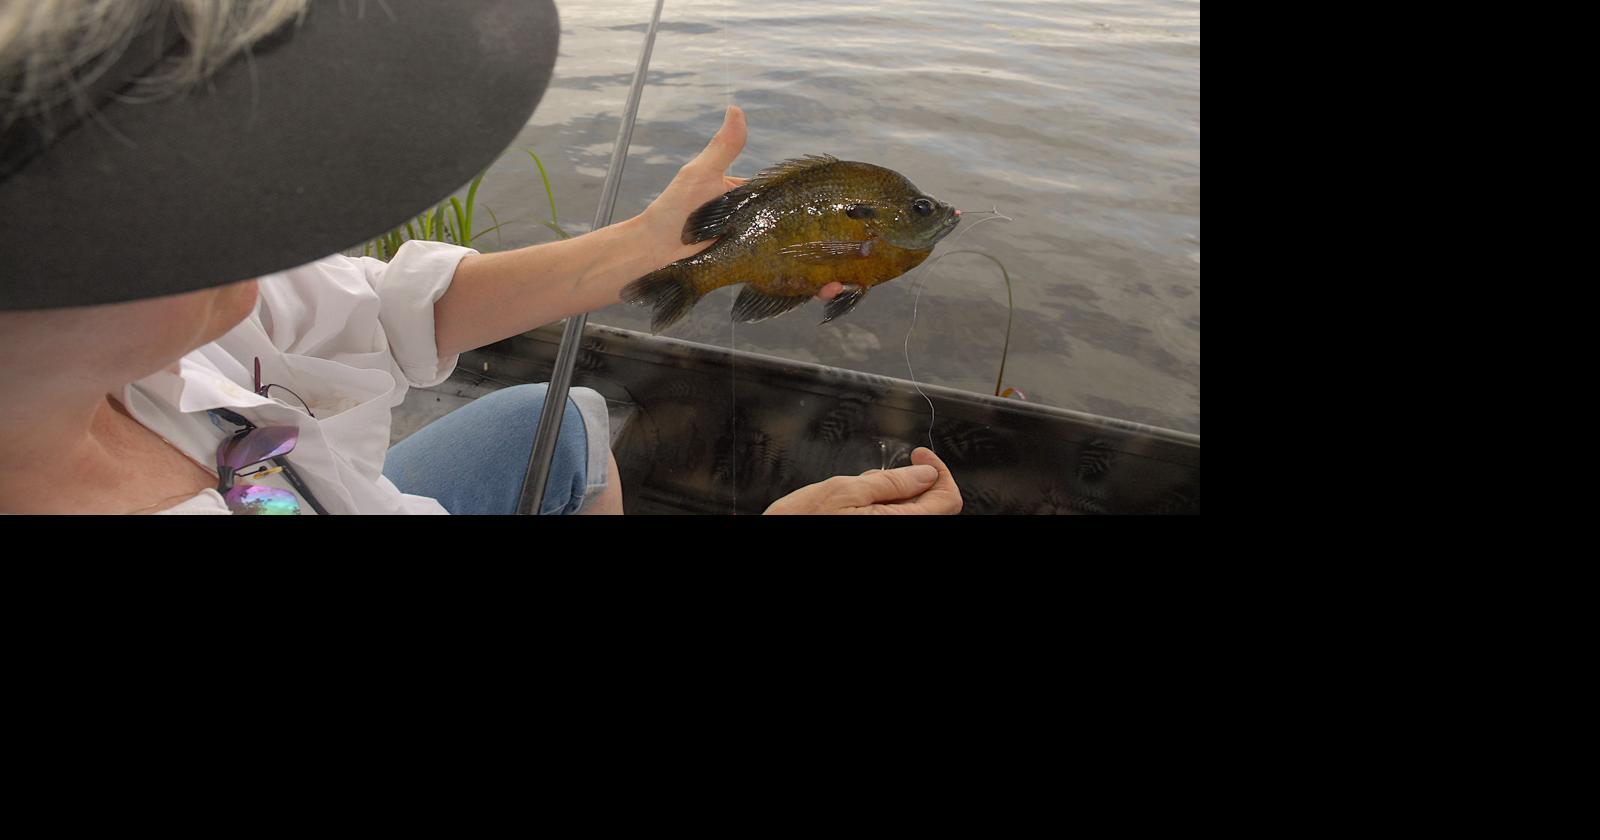 OUTDOORS: Pint-size sunfish are big on fun, fast on action, Sports